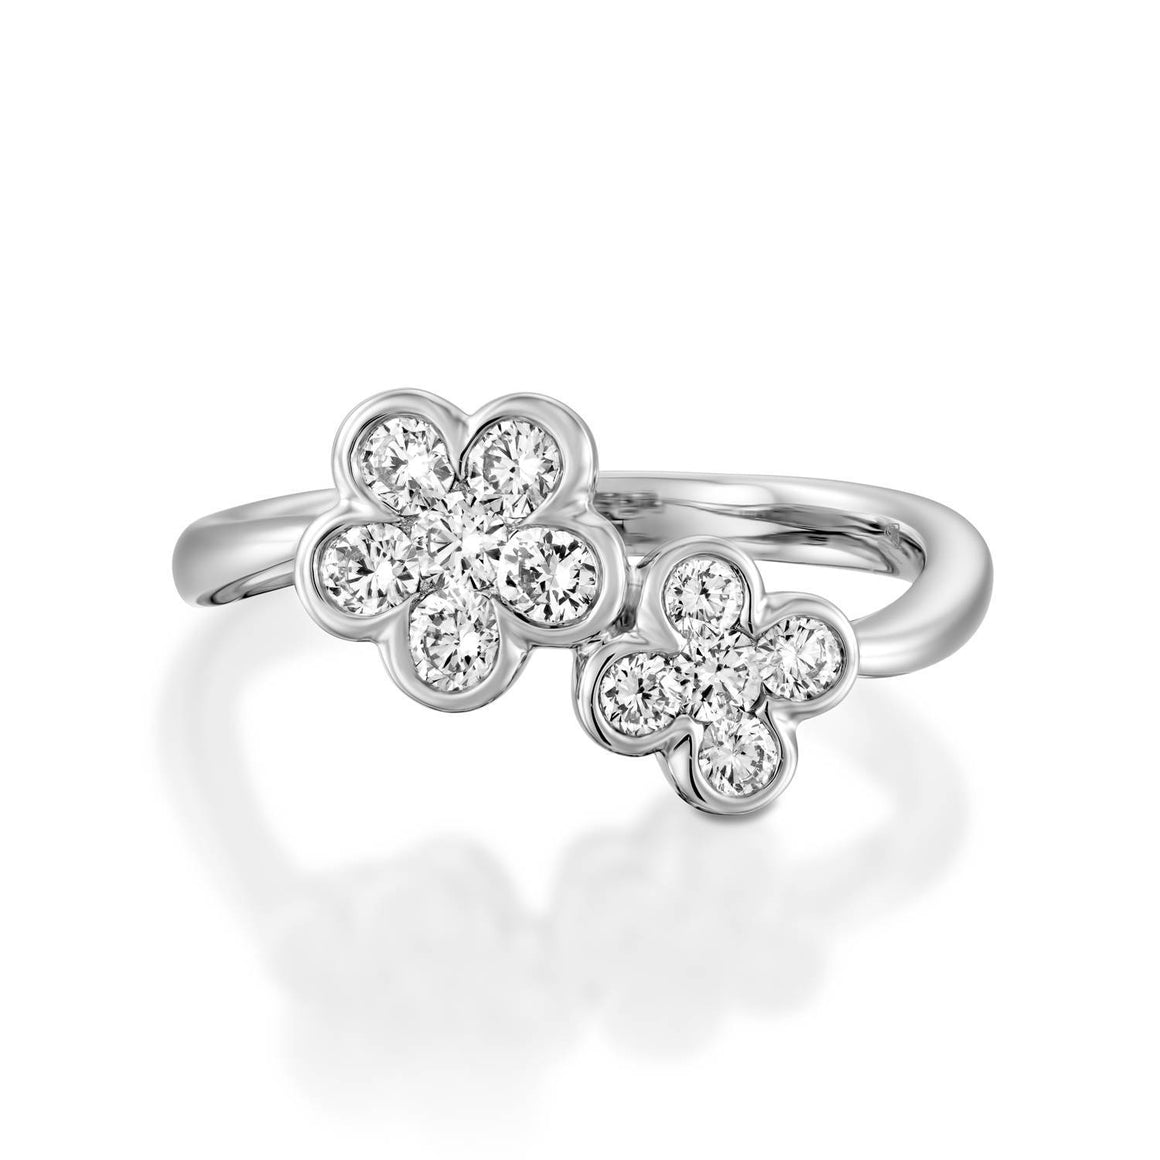 RNH668WC-18k White gold double diamond flower ring